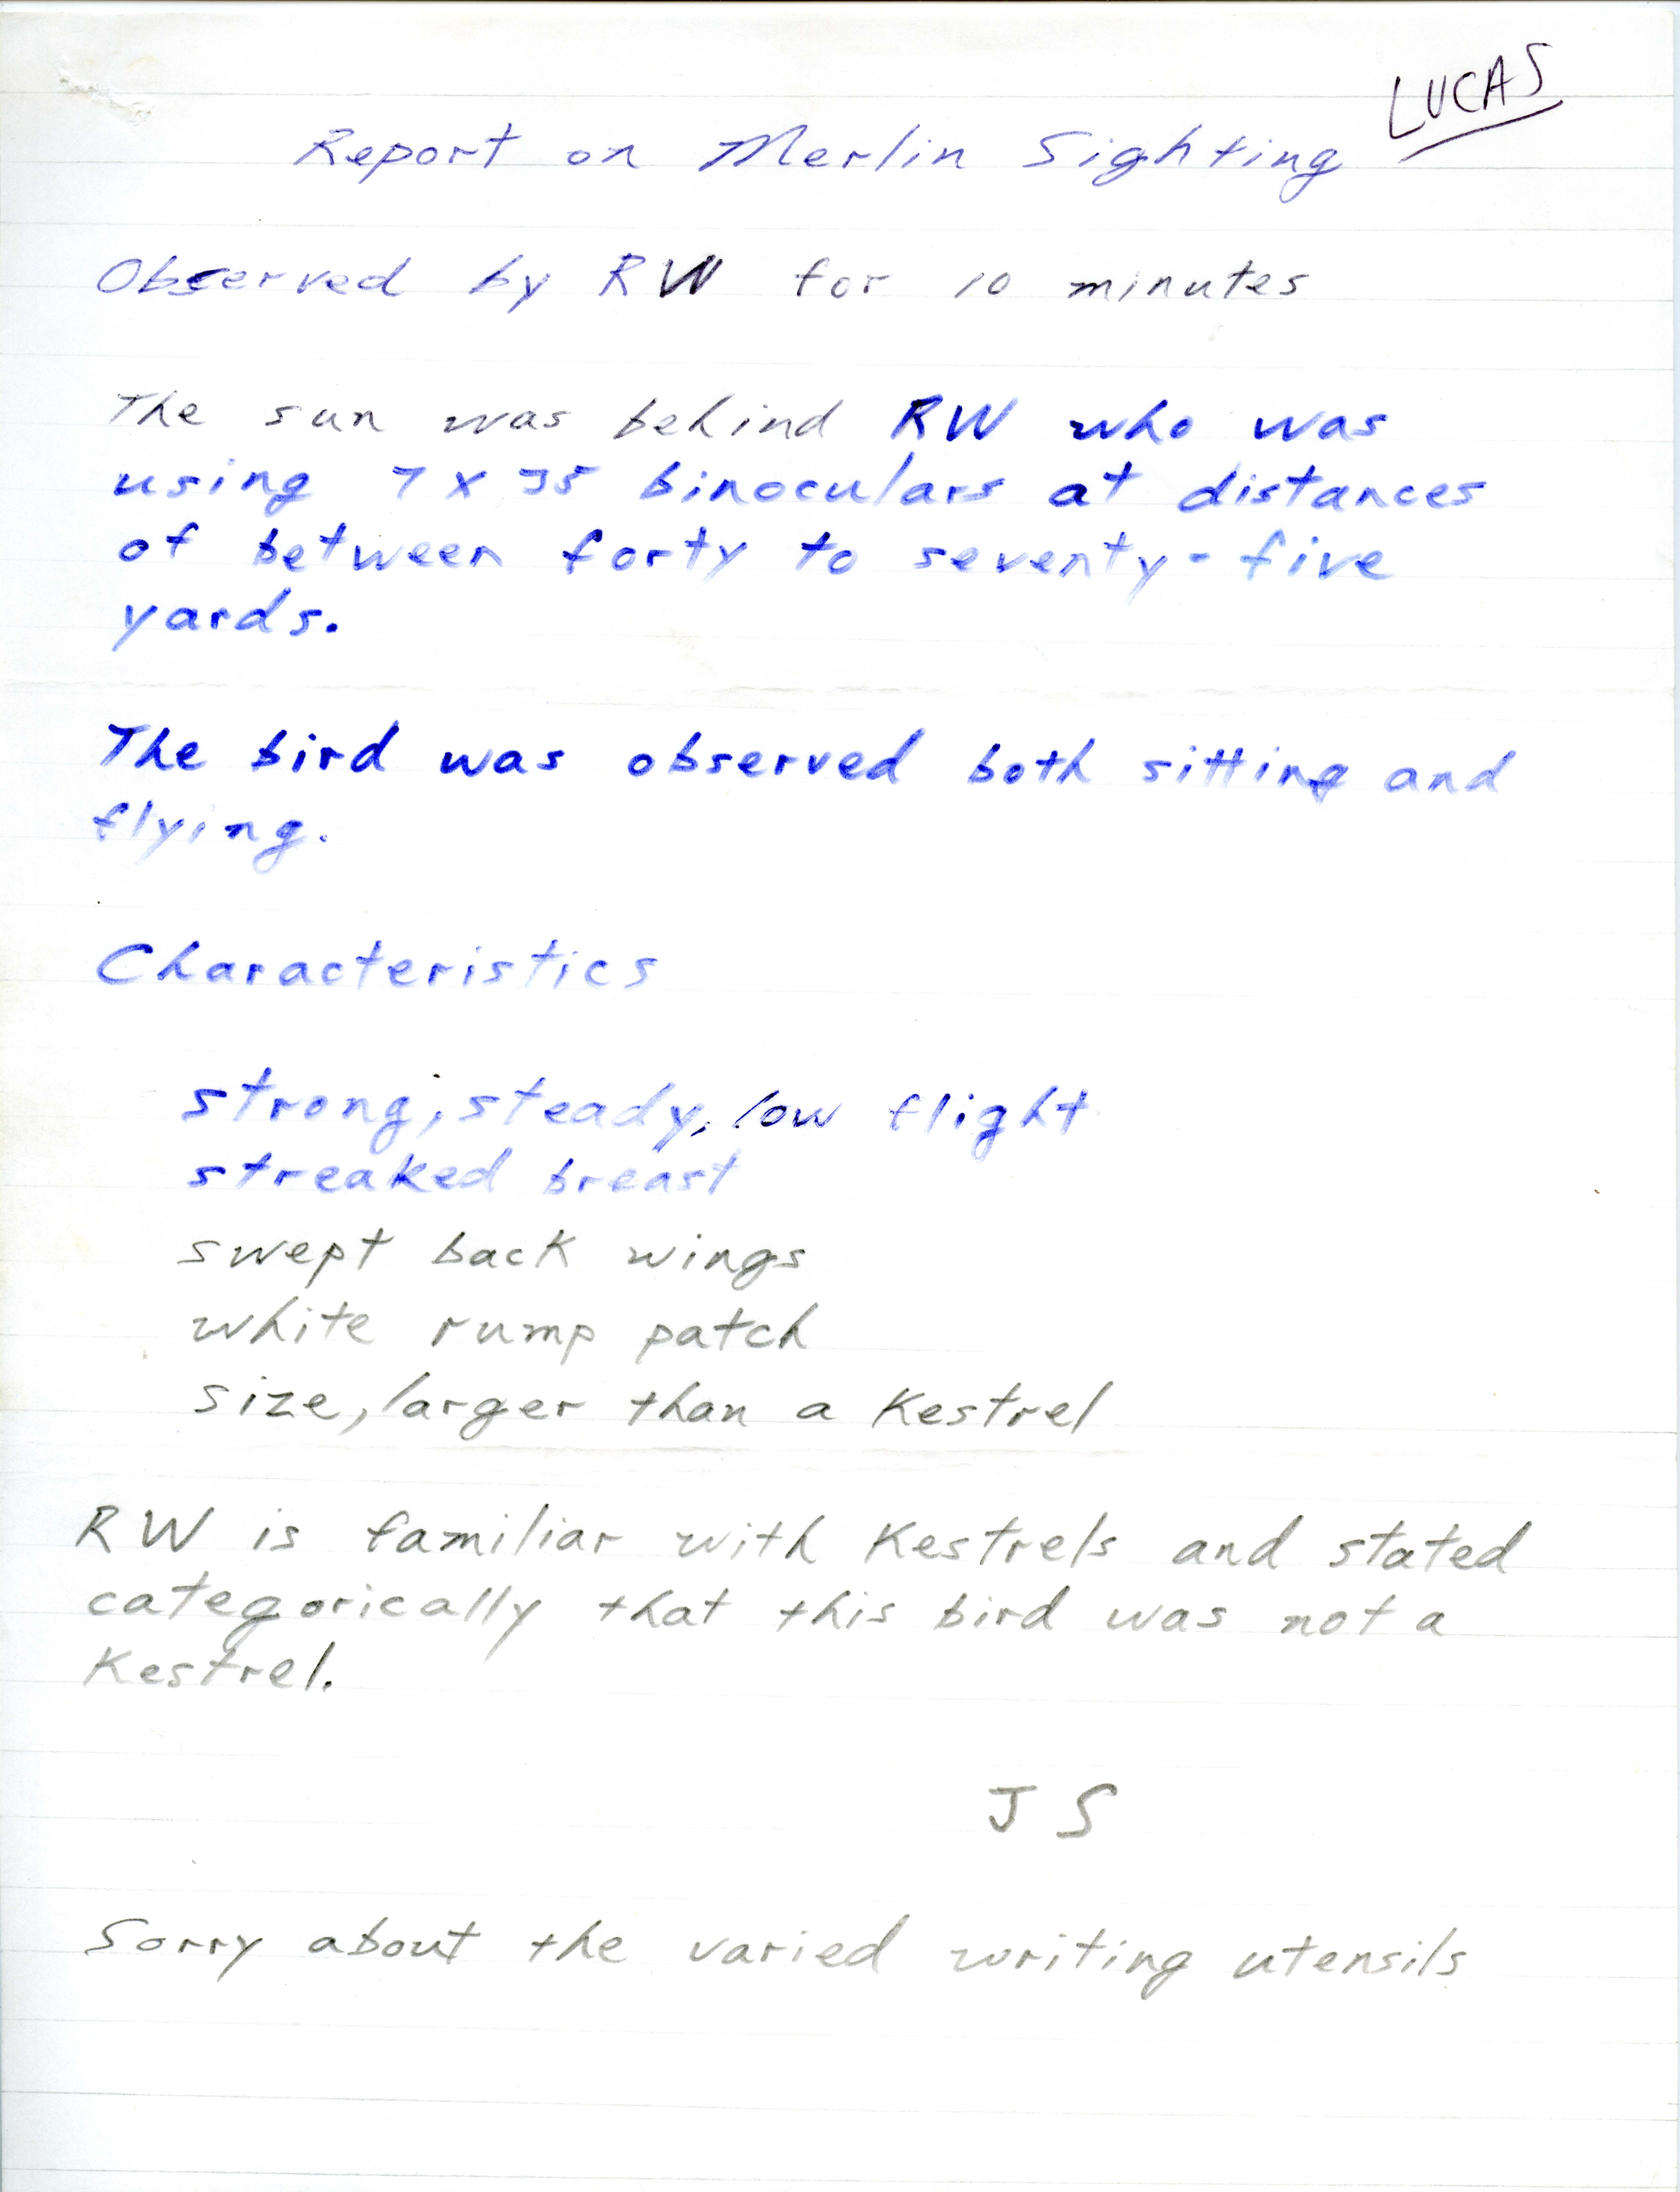 Report on Merlin sighting submitted by Joseph P. Schaufenbuel, December 11980